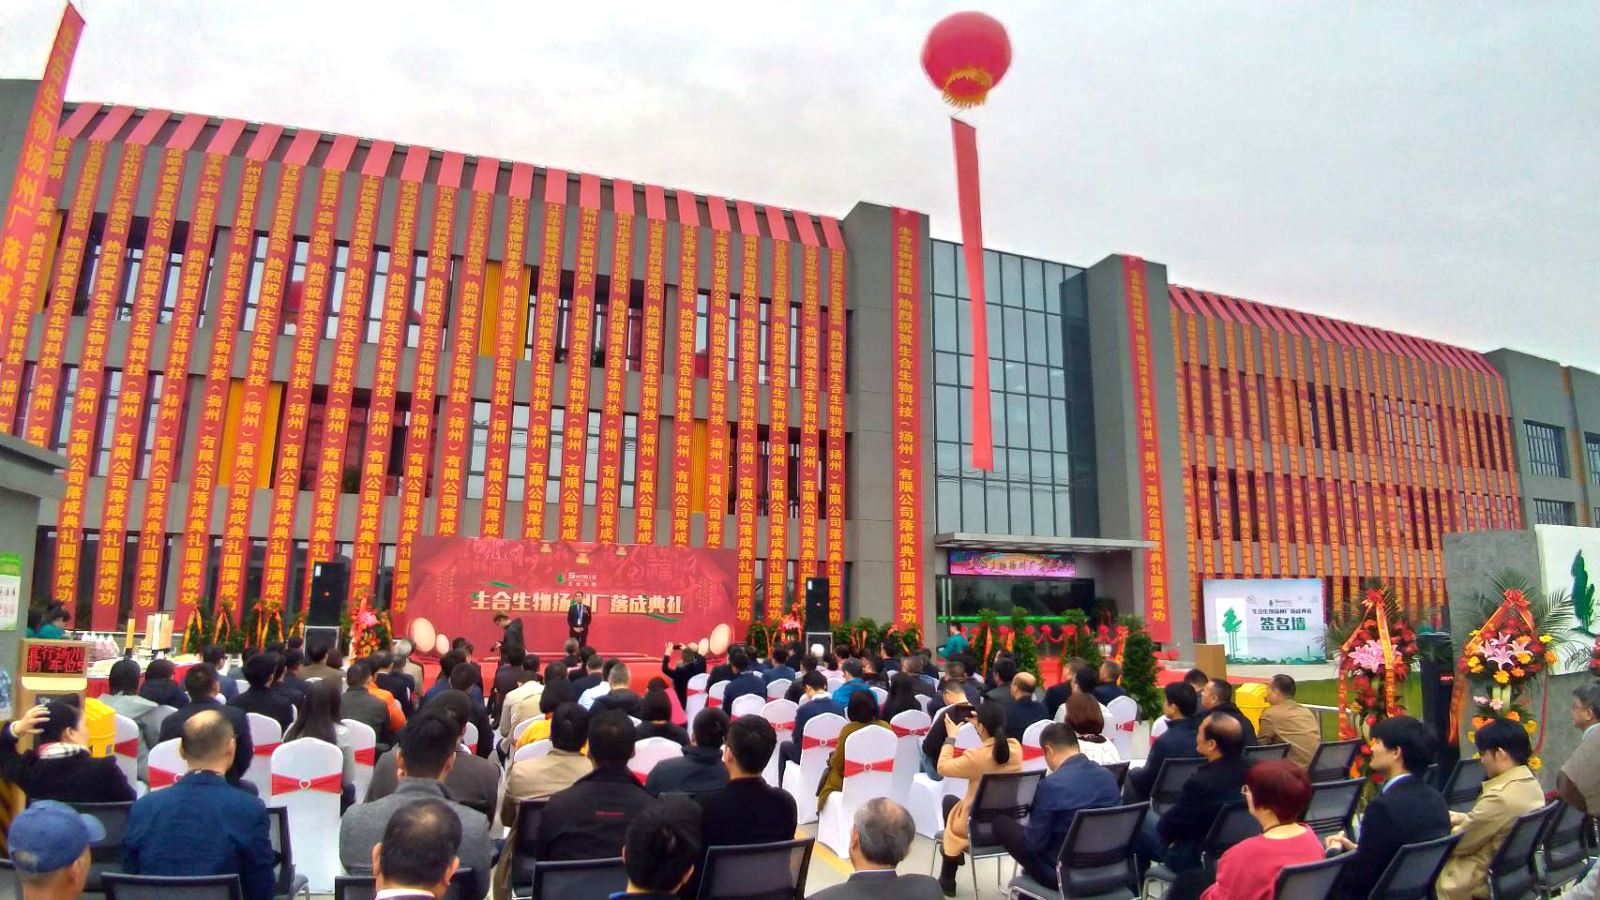 SynbioTech Group celebrates the new factory in Yangzhou China.